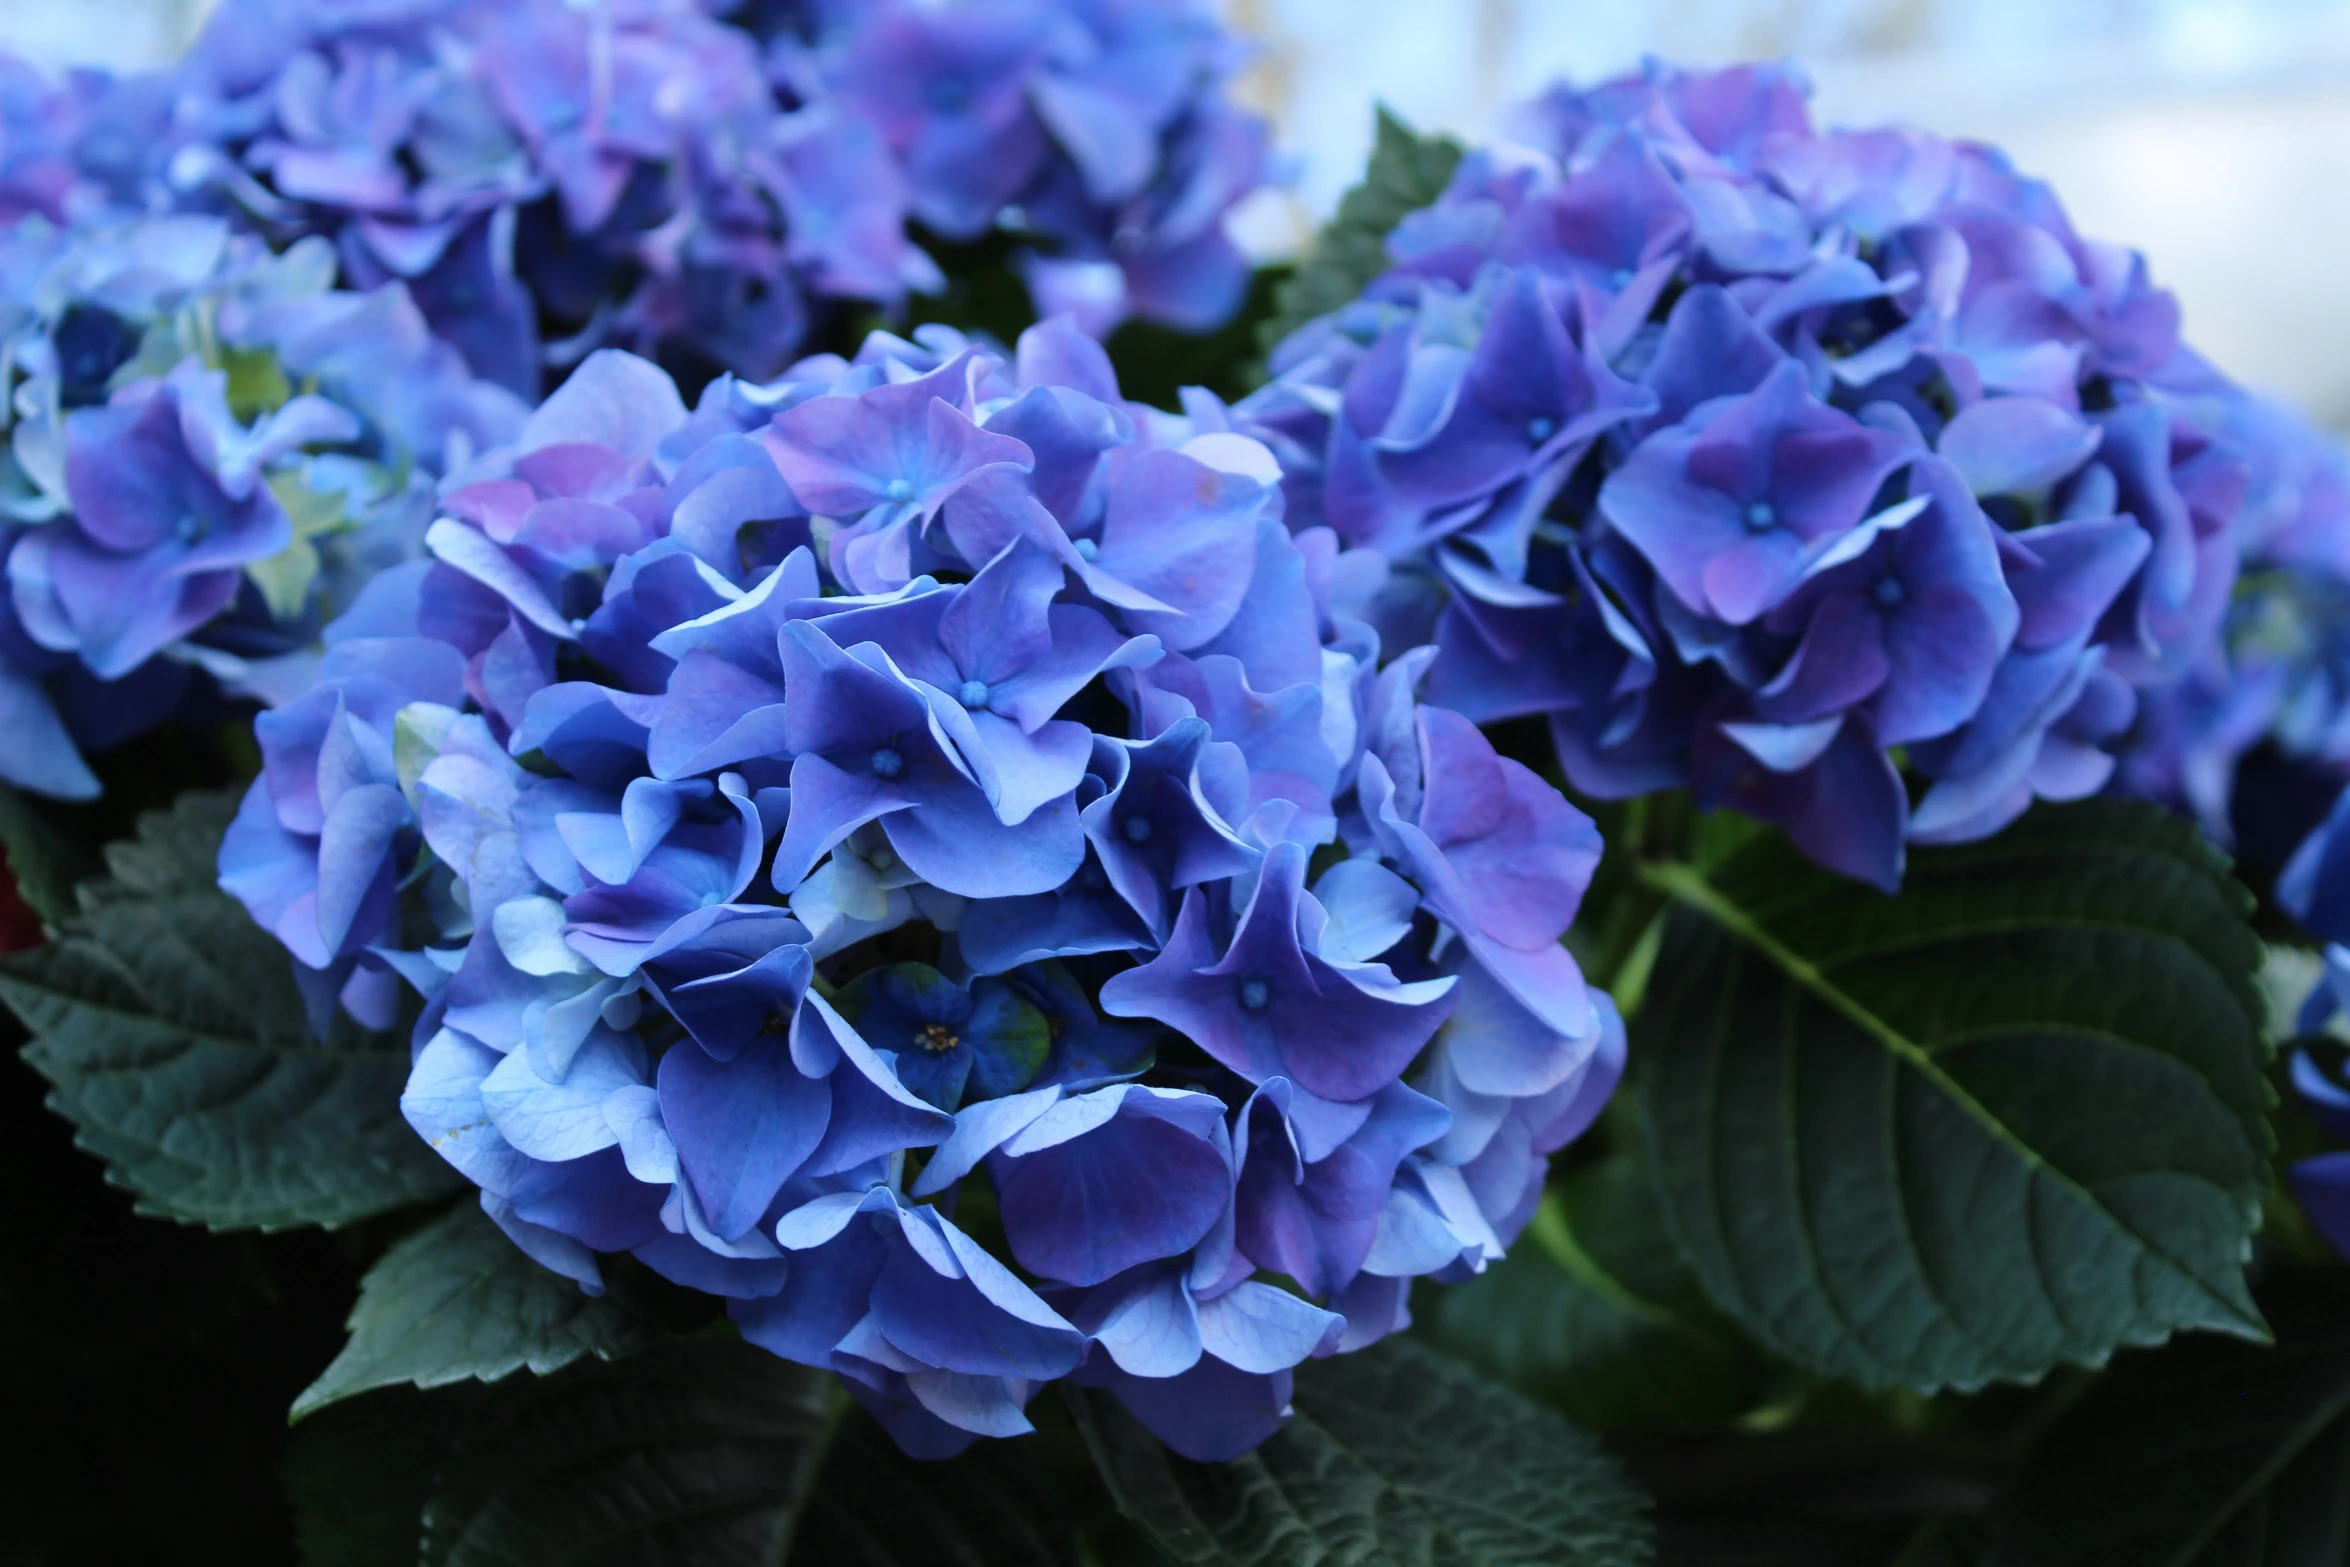 there is blue hydrangeas that are growing on the plant